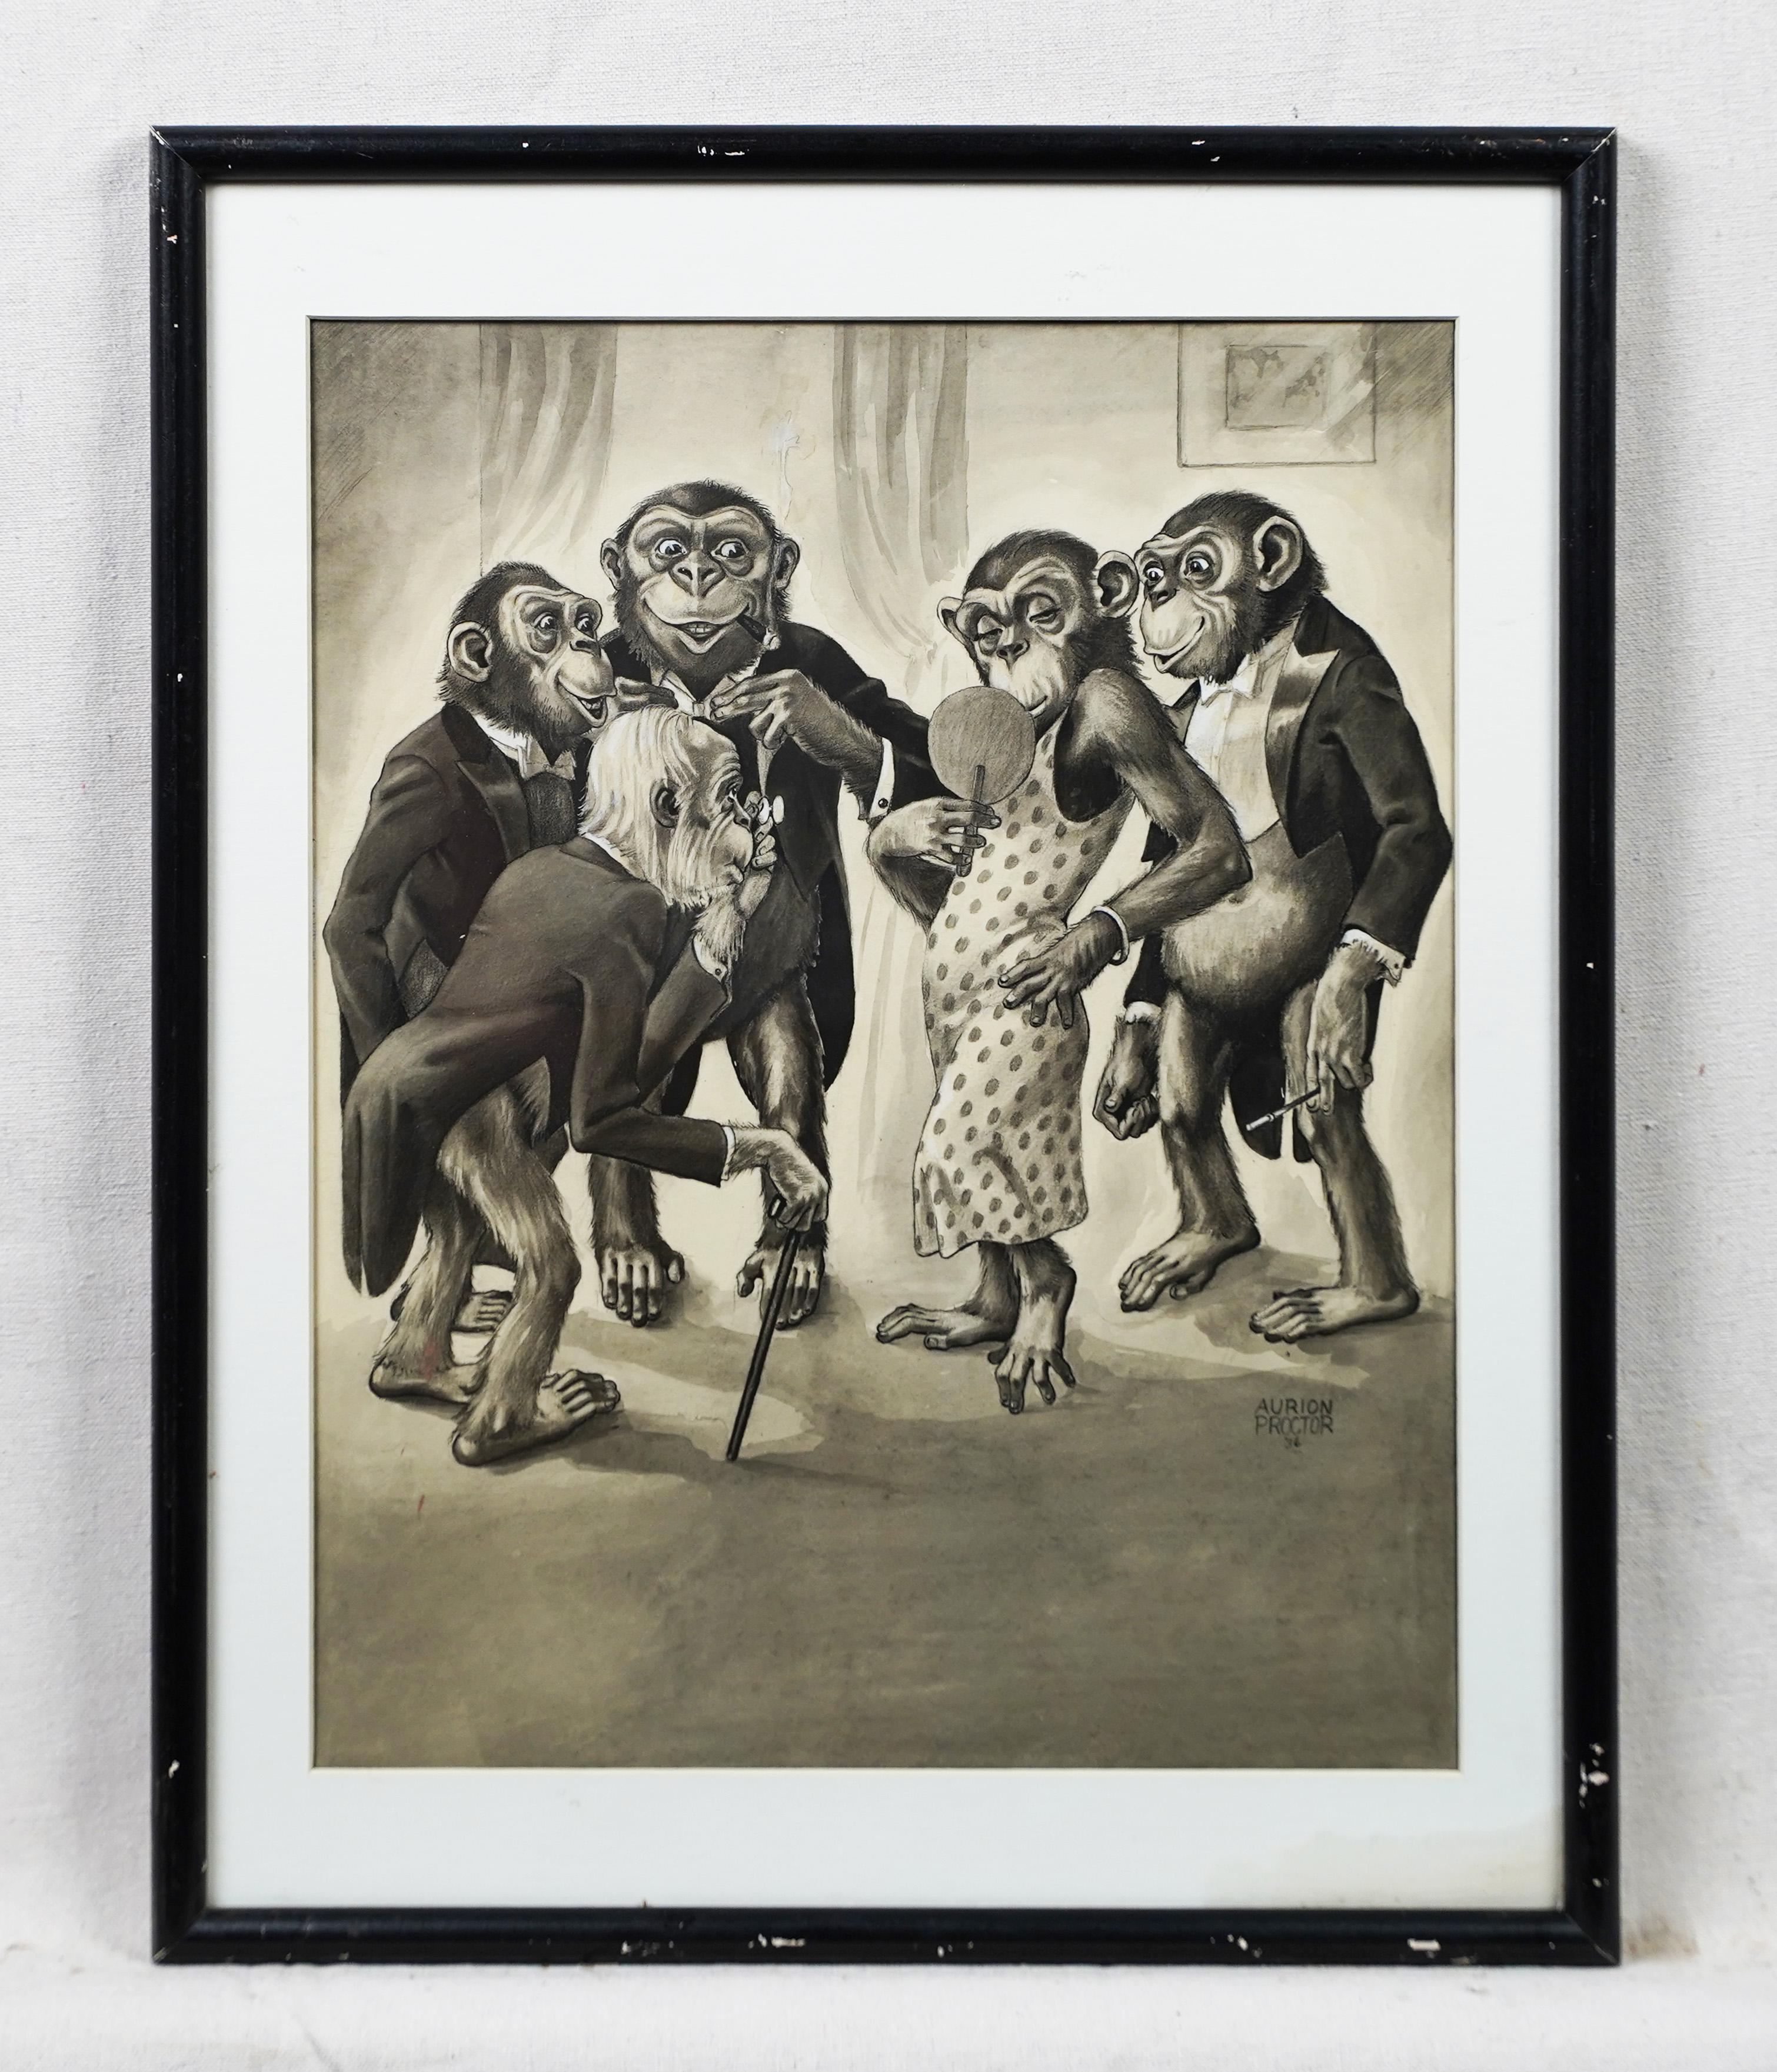 Antique American Surreal Anamorphic Signed Beautiful Monkey Humorous Drawing  - Surrealist Painting by Aurion M. Proctor